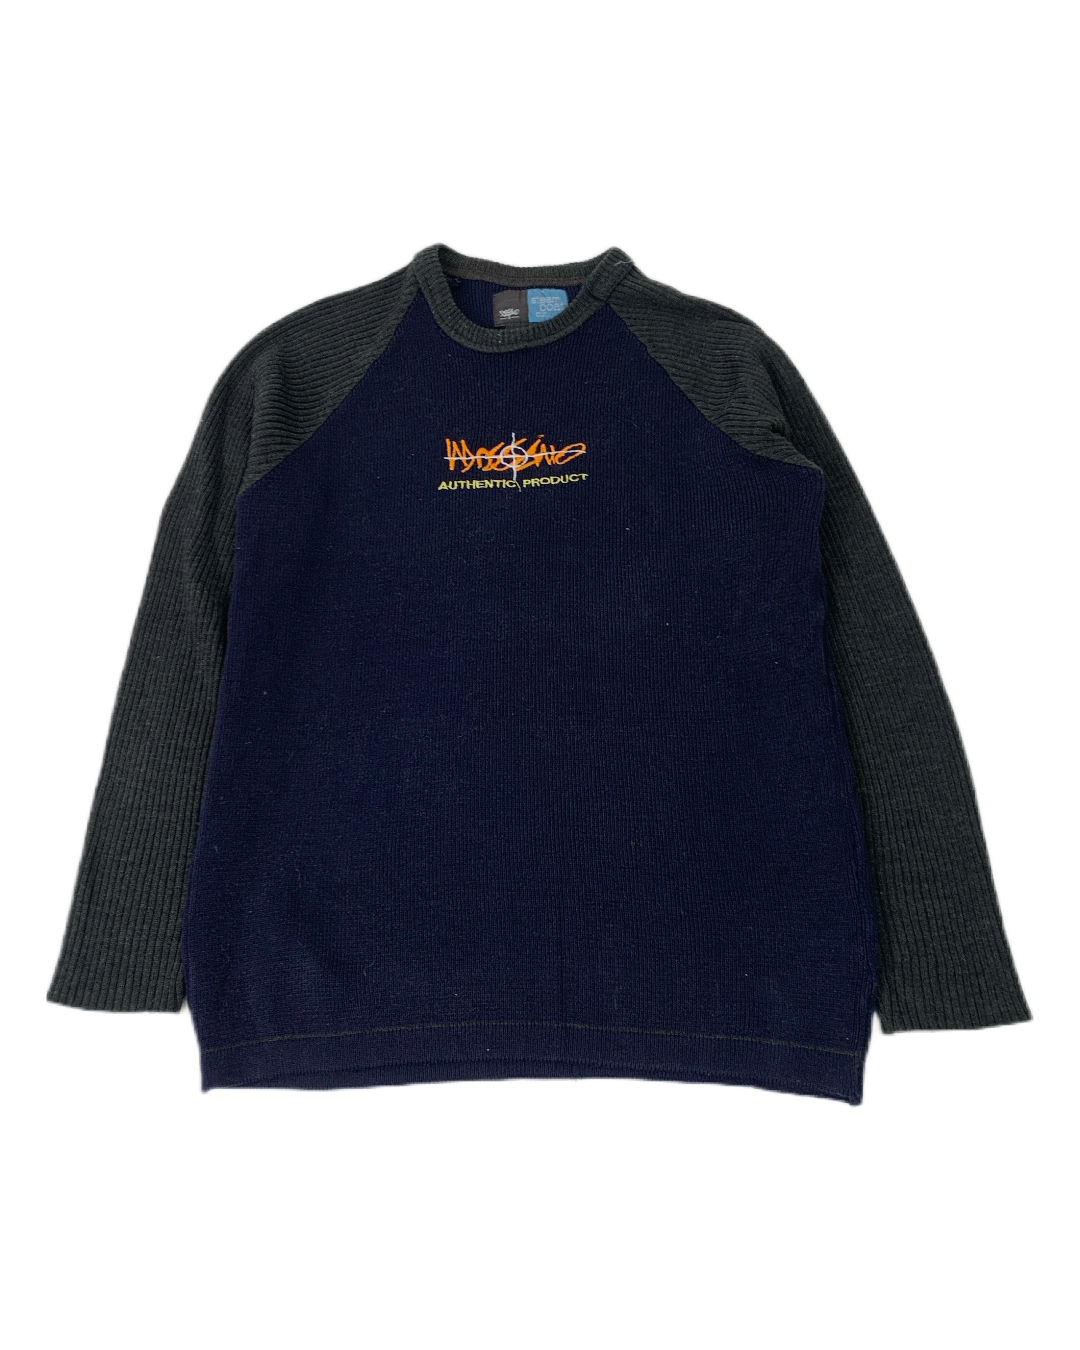 Mossimo Vintage Y2K Sweater - M